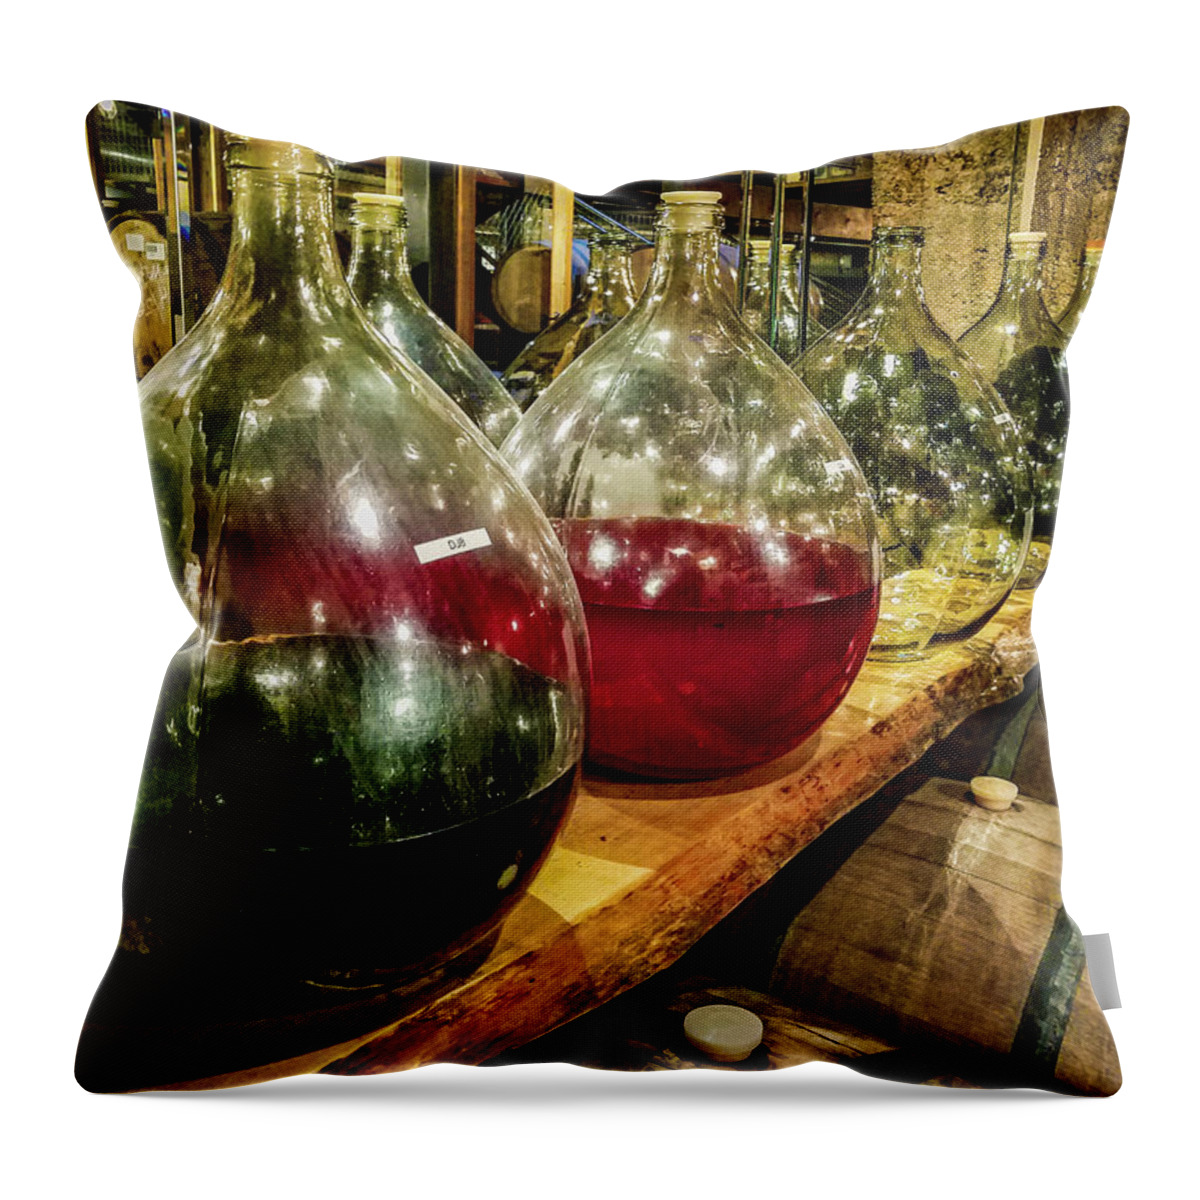 Mead Throw Pillow featuring the photograph Making Mead by Bonny Puckett